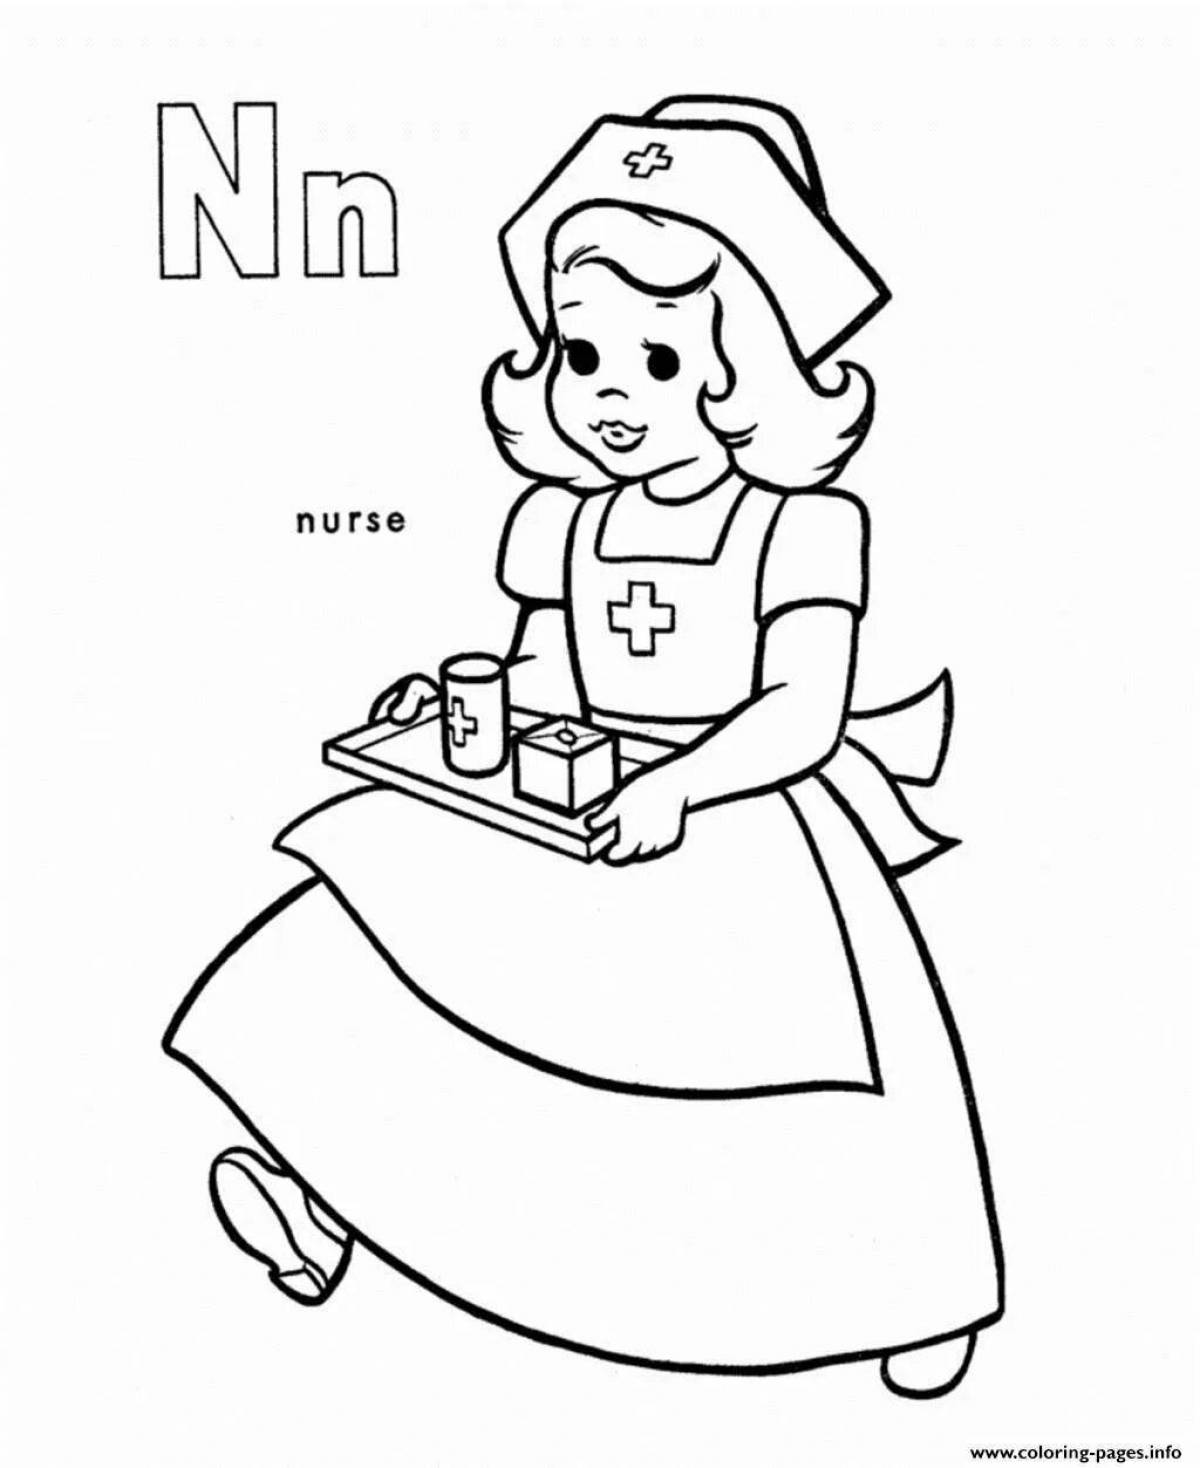 Innovative military nurse coloring book for kids